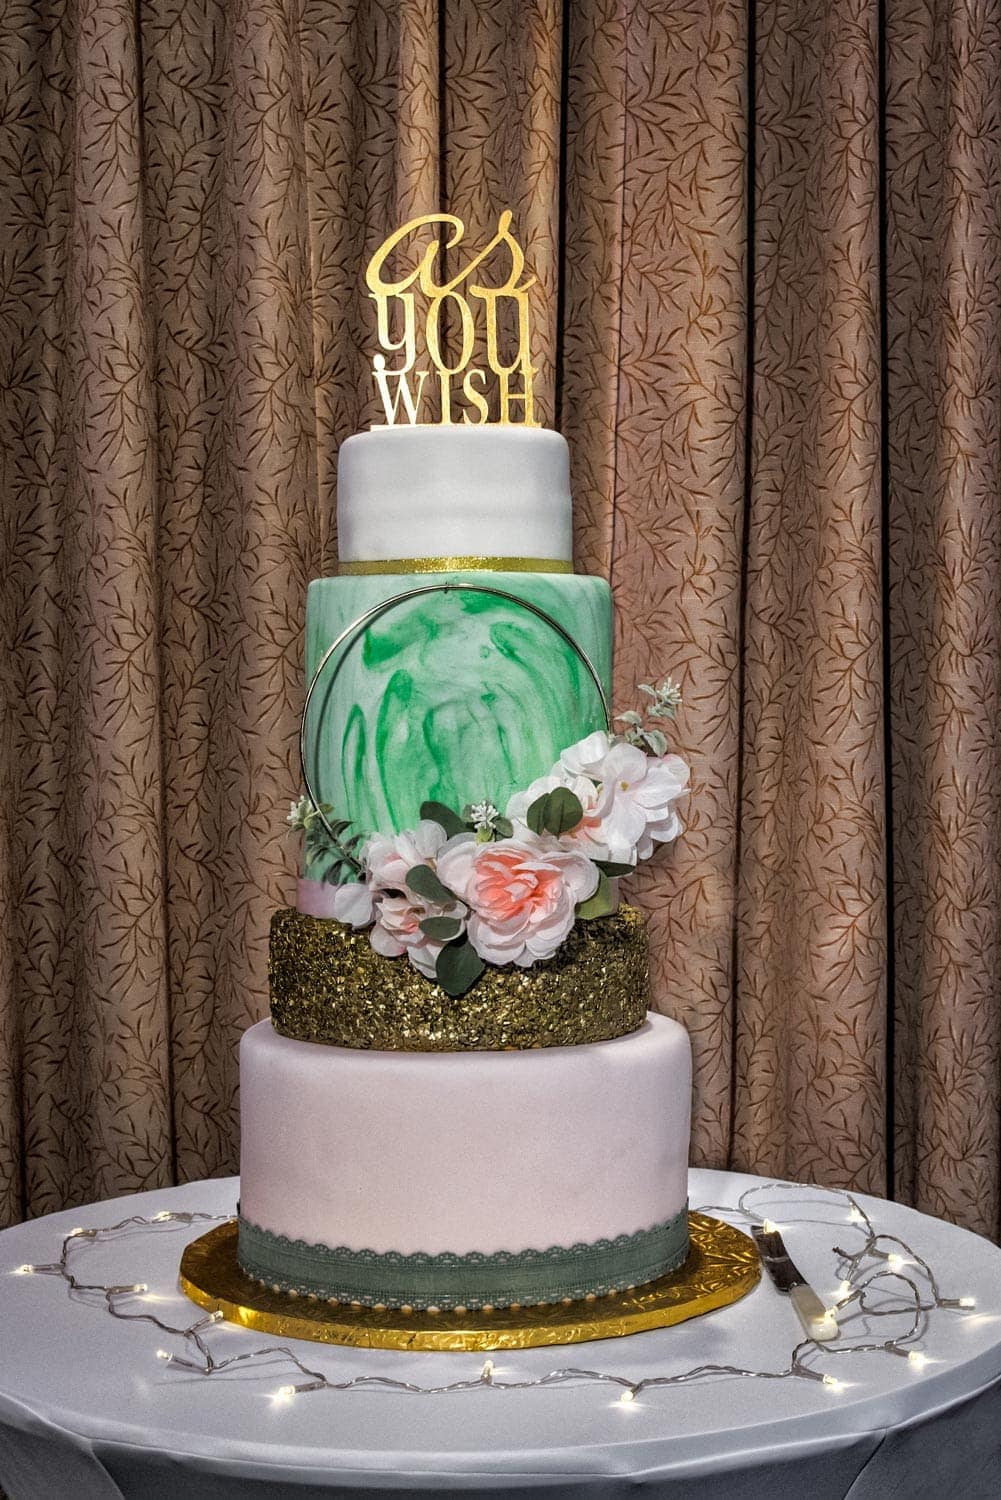 A 4 tier wedding cake with gold wedding cake topper designed by the bride at a Best Western Chocolate Lake wedding.